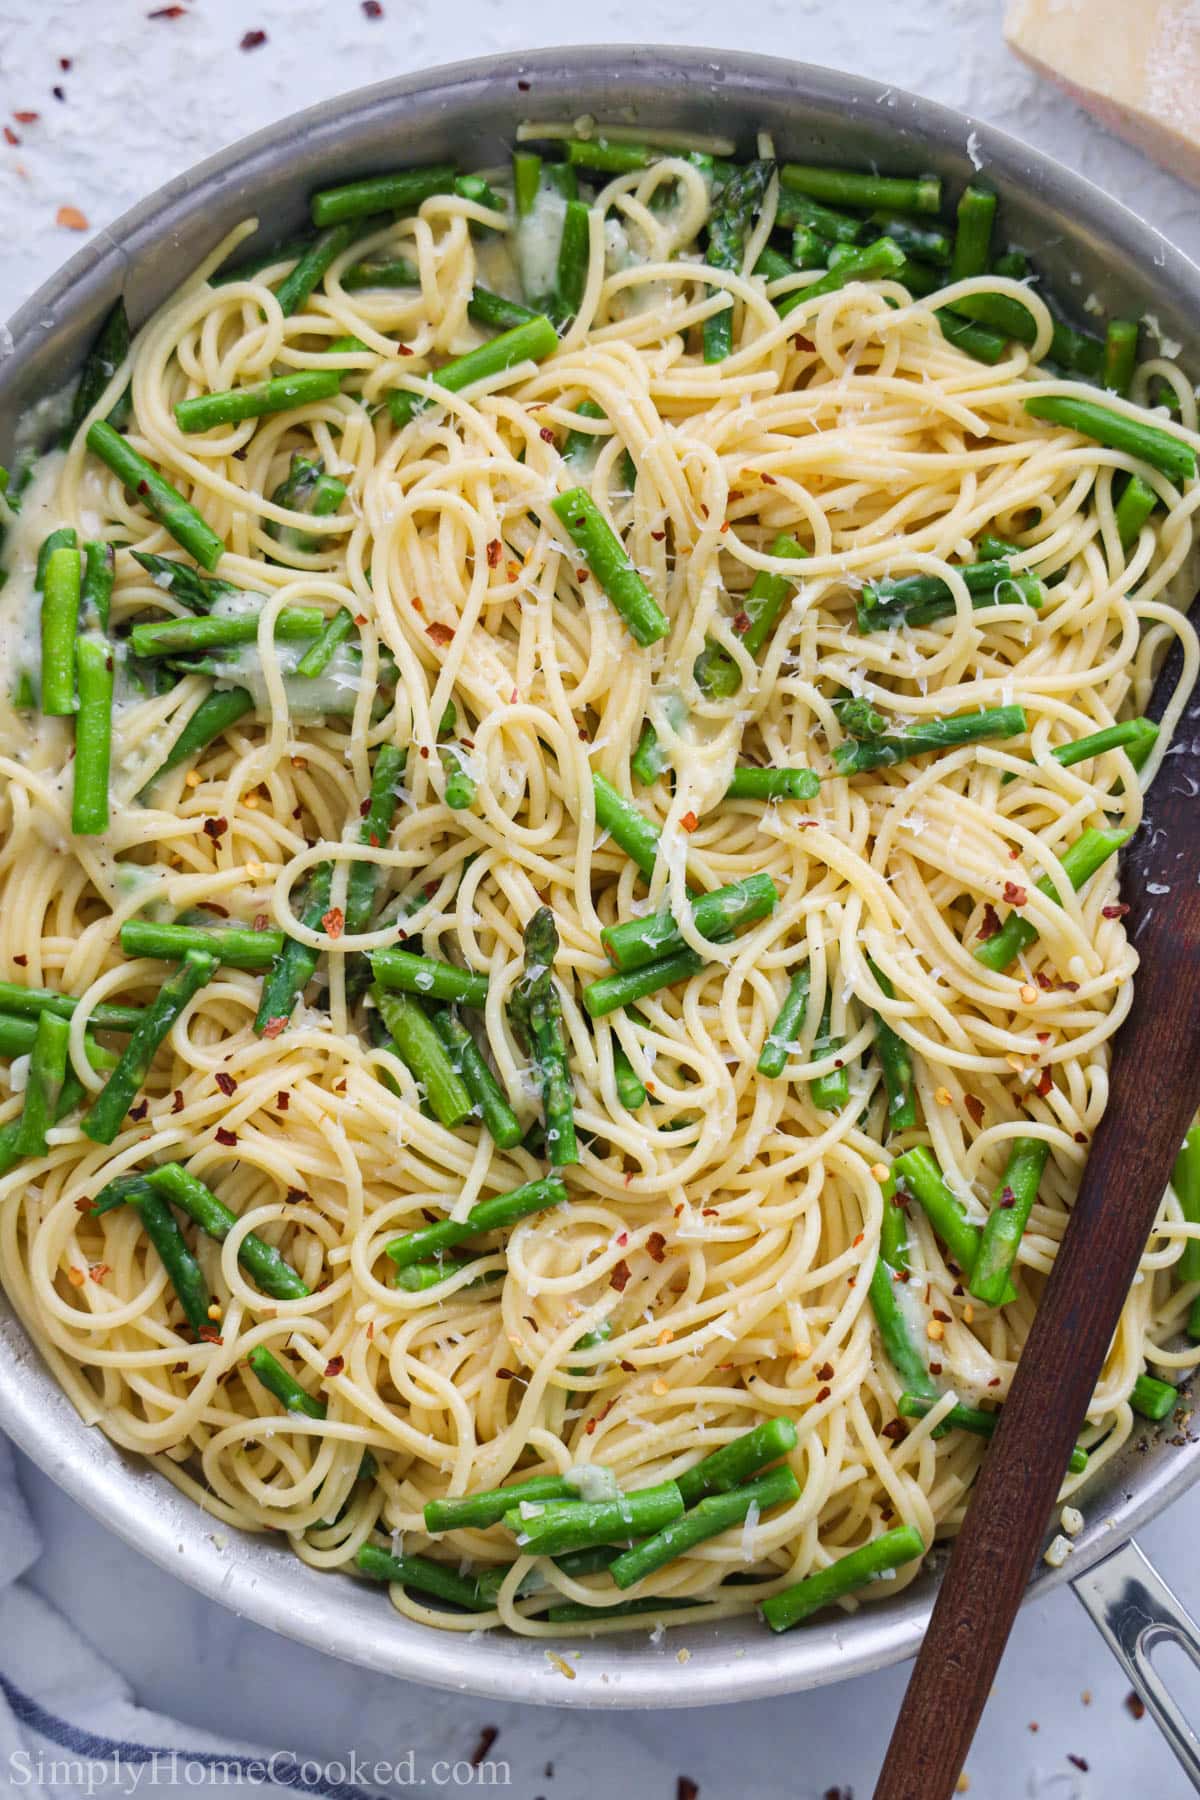 https://simplyhomecooked.com/wp-content/uploads/2022/03/asparagus-pasta-2.jpg